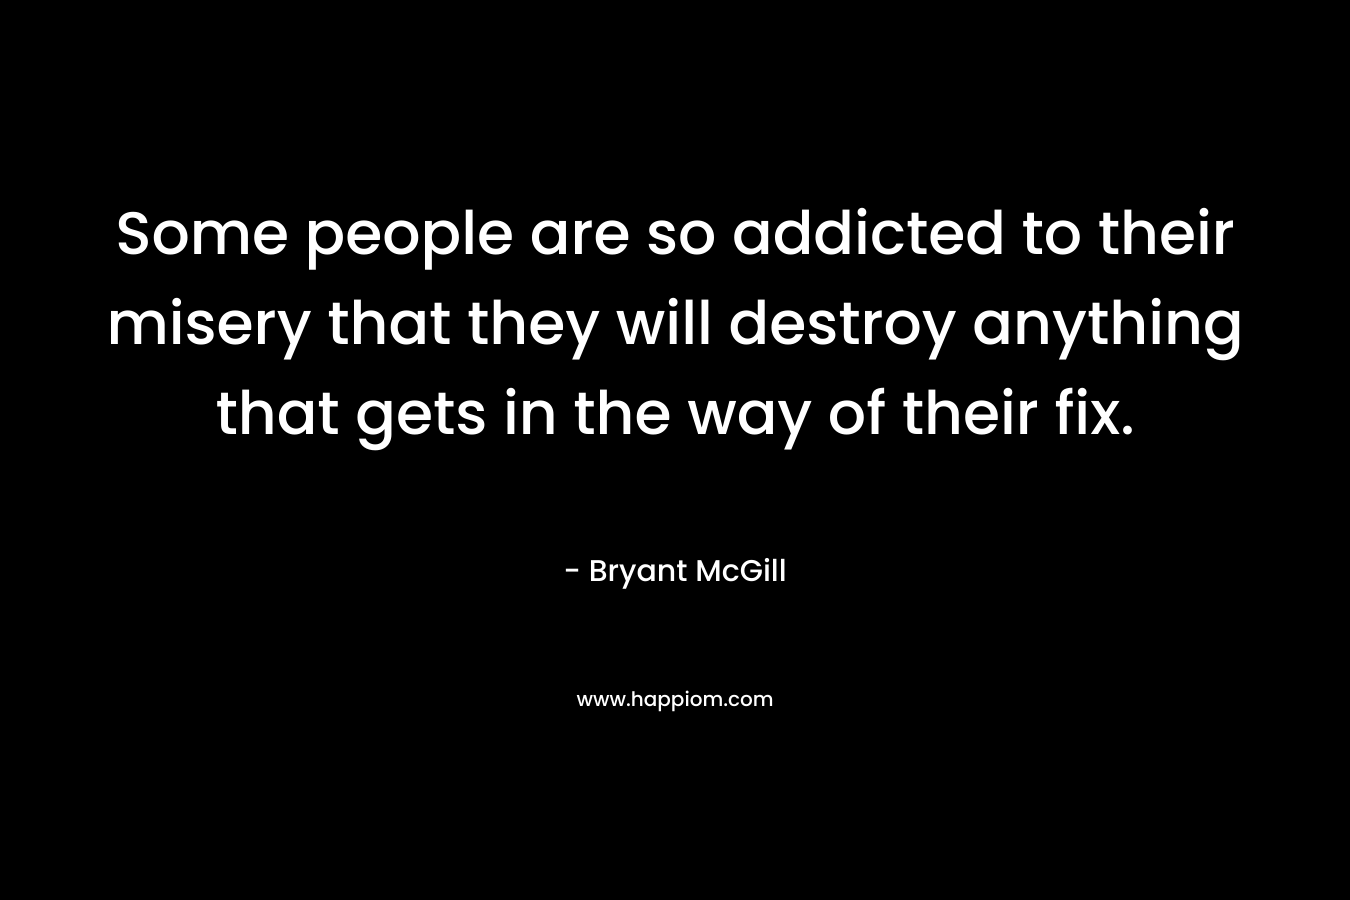 Some people are so addicted to their misery that they will destroy anything that gets in the way of their fix. – Bryant McGill